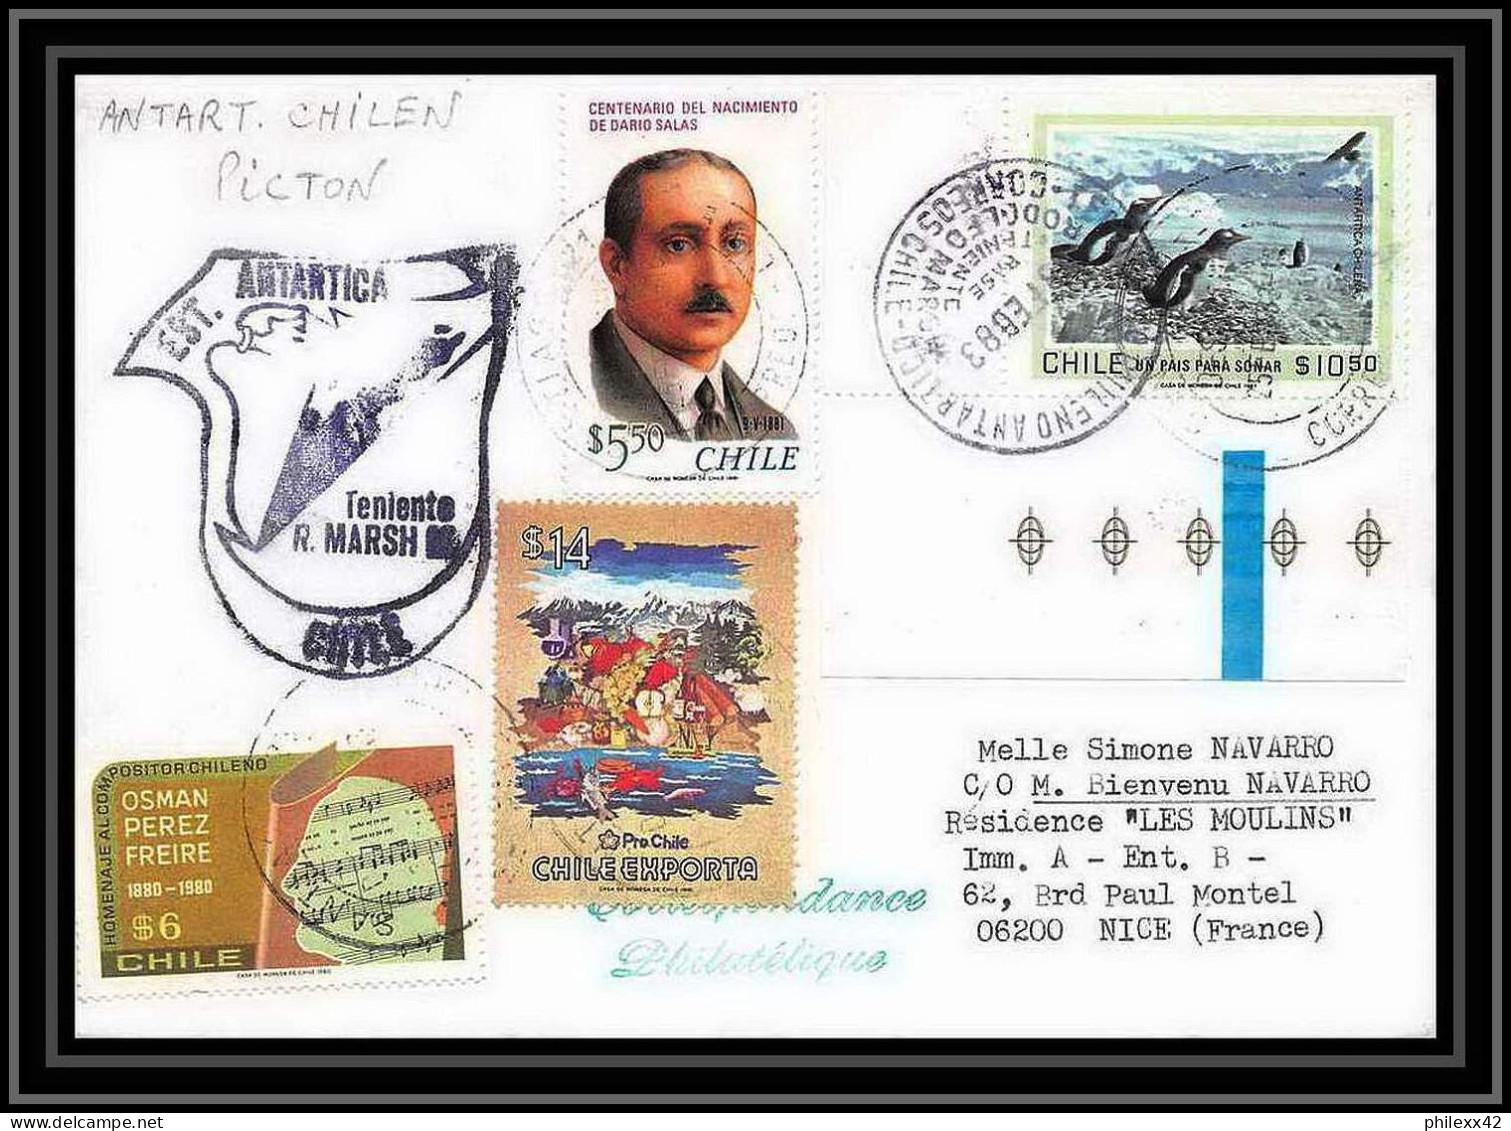 1917 Antarctic Chili (chile) Lettre (cover) Picton 9/2/1983 - Research Stations